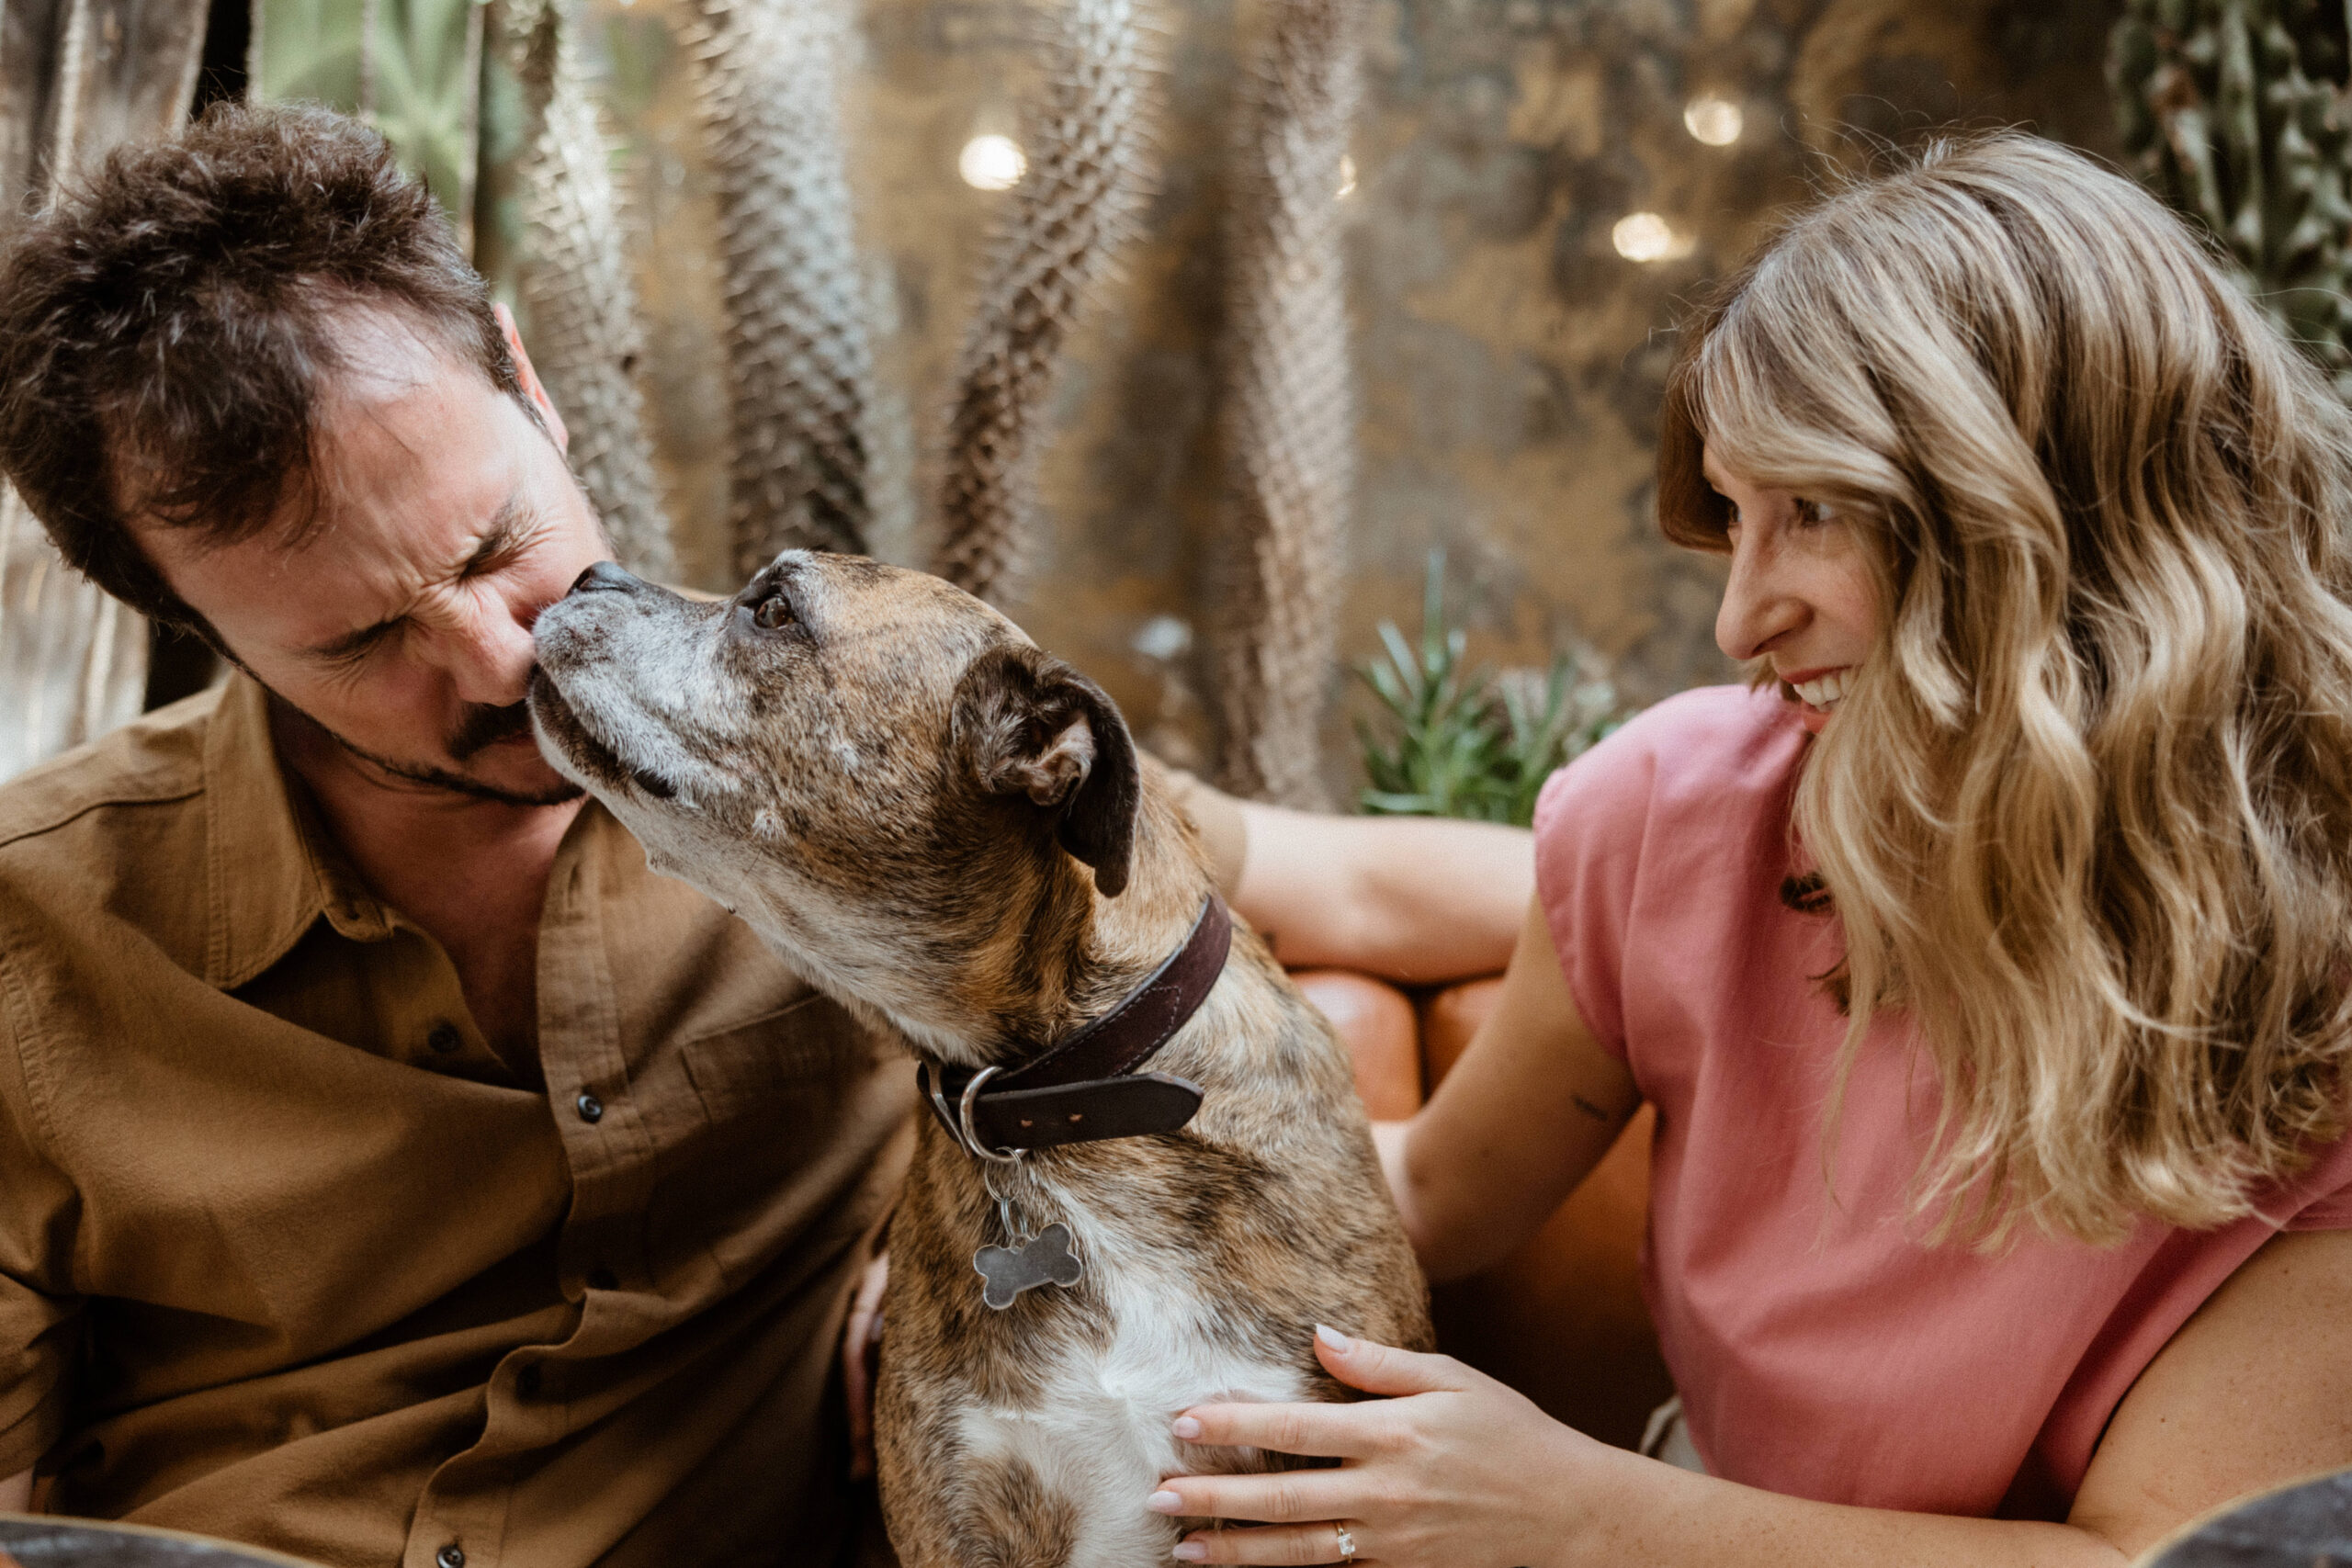 playful photo with man and womans dog licking mans face.